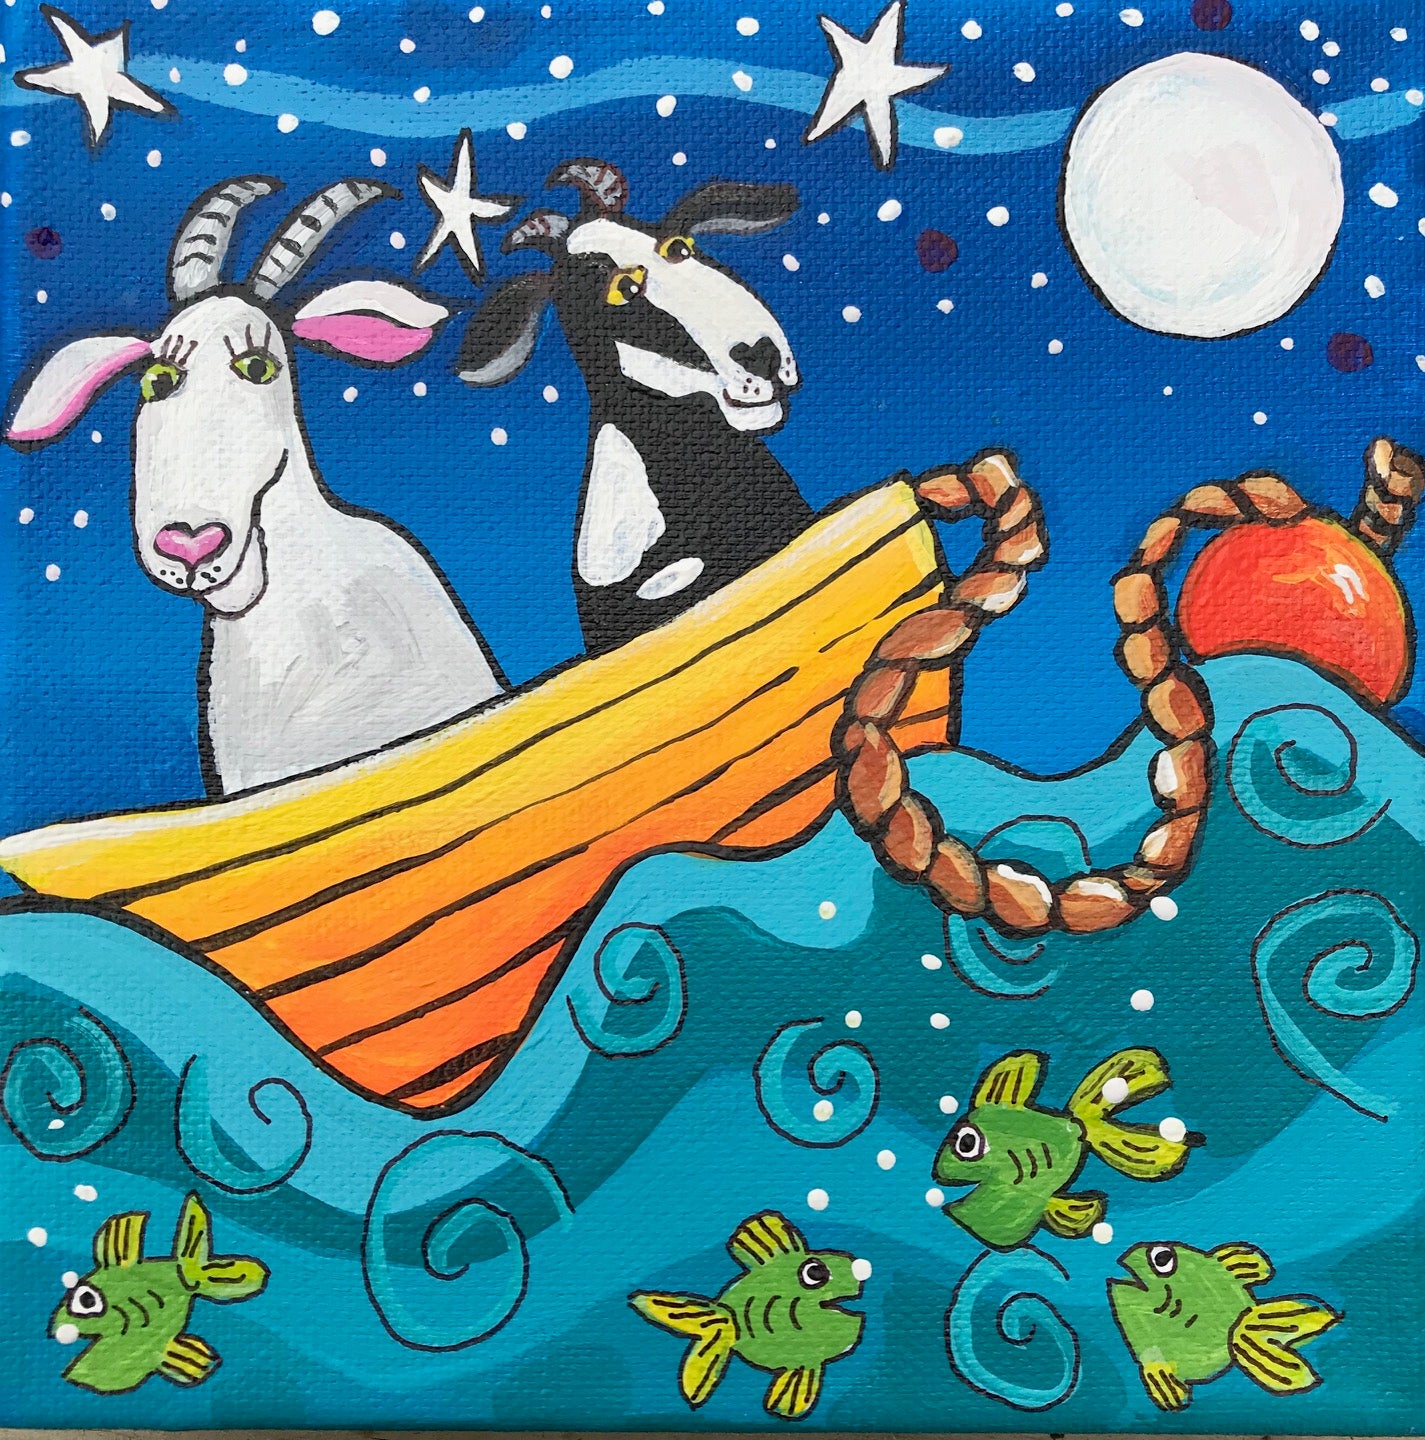 (SOLD) We'll Drift and We'll Float in Our Old Goaty Boat and We'll Wish Upon Stars in the Sky, We'll Sing and We'll Sway as the Fishy Fish Play, Together, Old Goat You and I